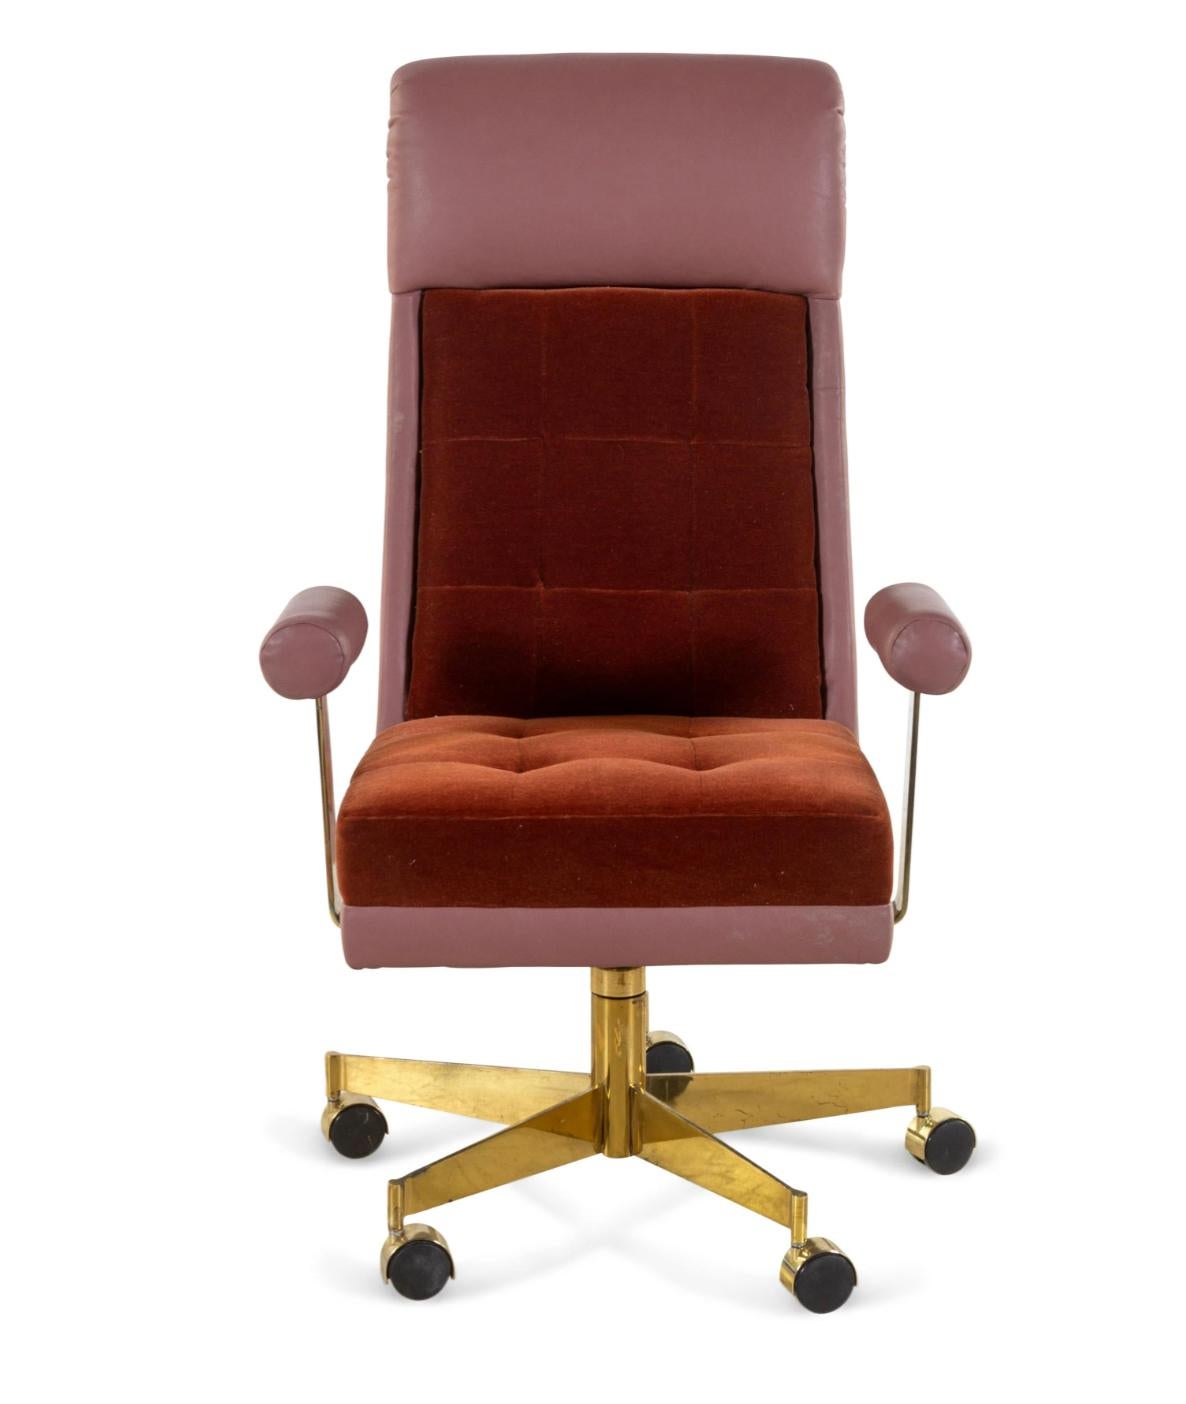 This gorgeous leather, mohair and brass executive desk chair by Vladimir Kagan for Vladimir Kagan Designs, Inc is a rare authentic signed example with its original label underneath the chair seat, designed in the 1970s and this example crafted in